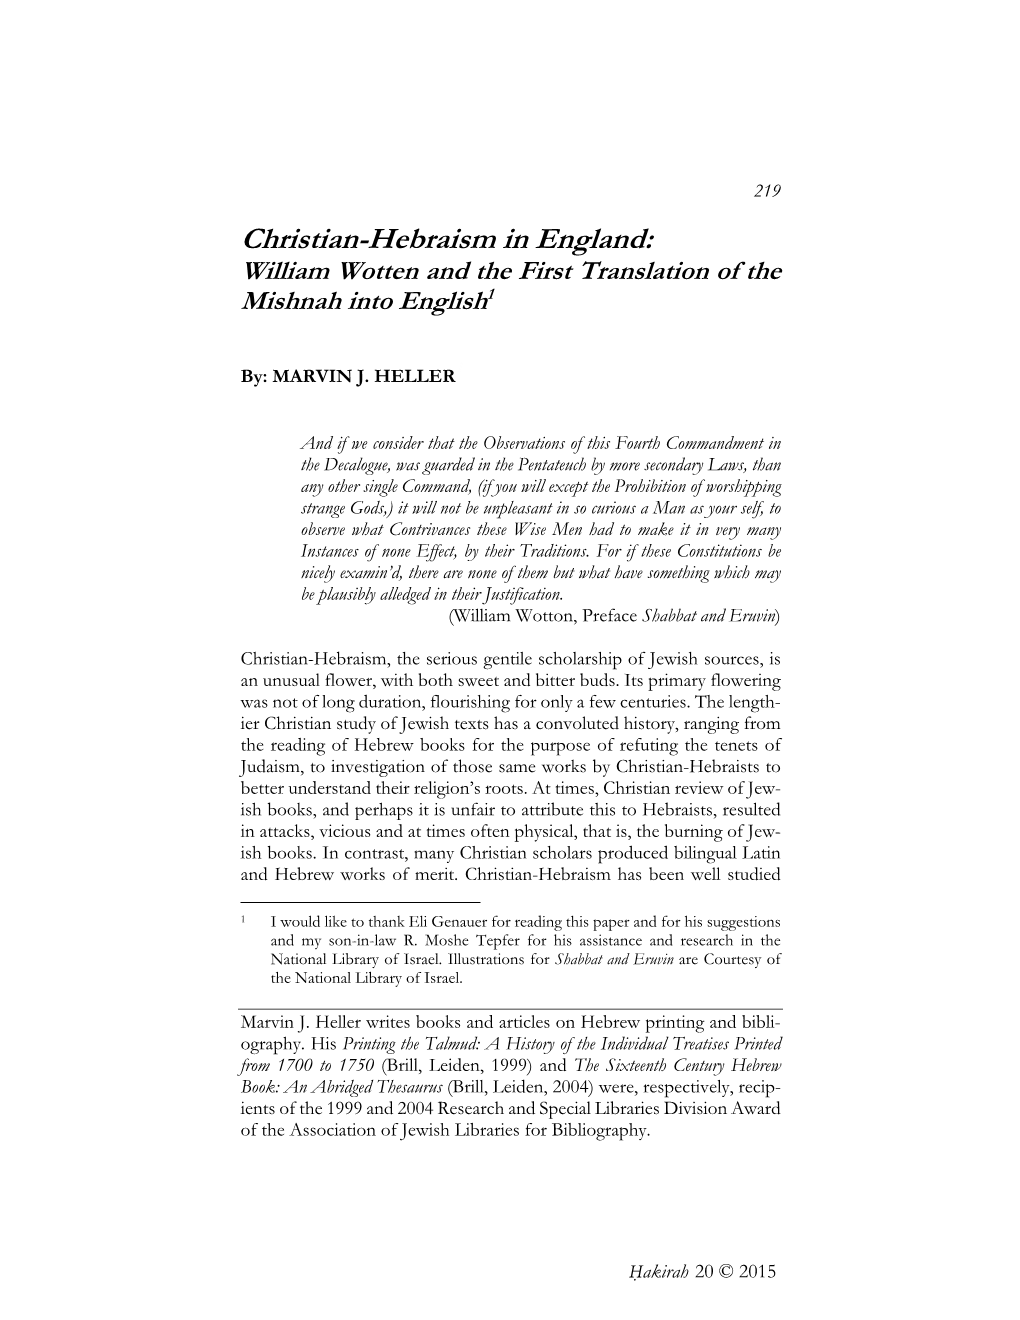 Christian-Hebraism in England: William Wotten and the First Translation of the Mishnah Into English1